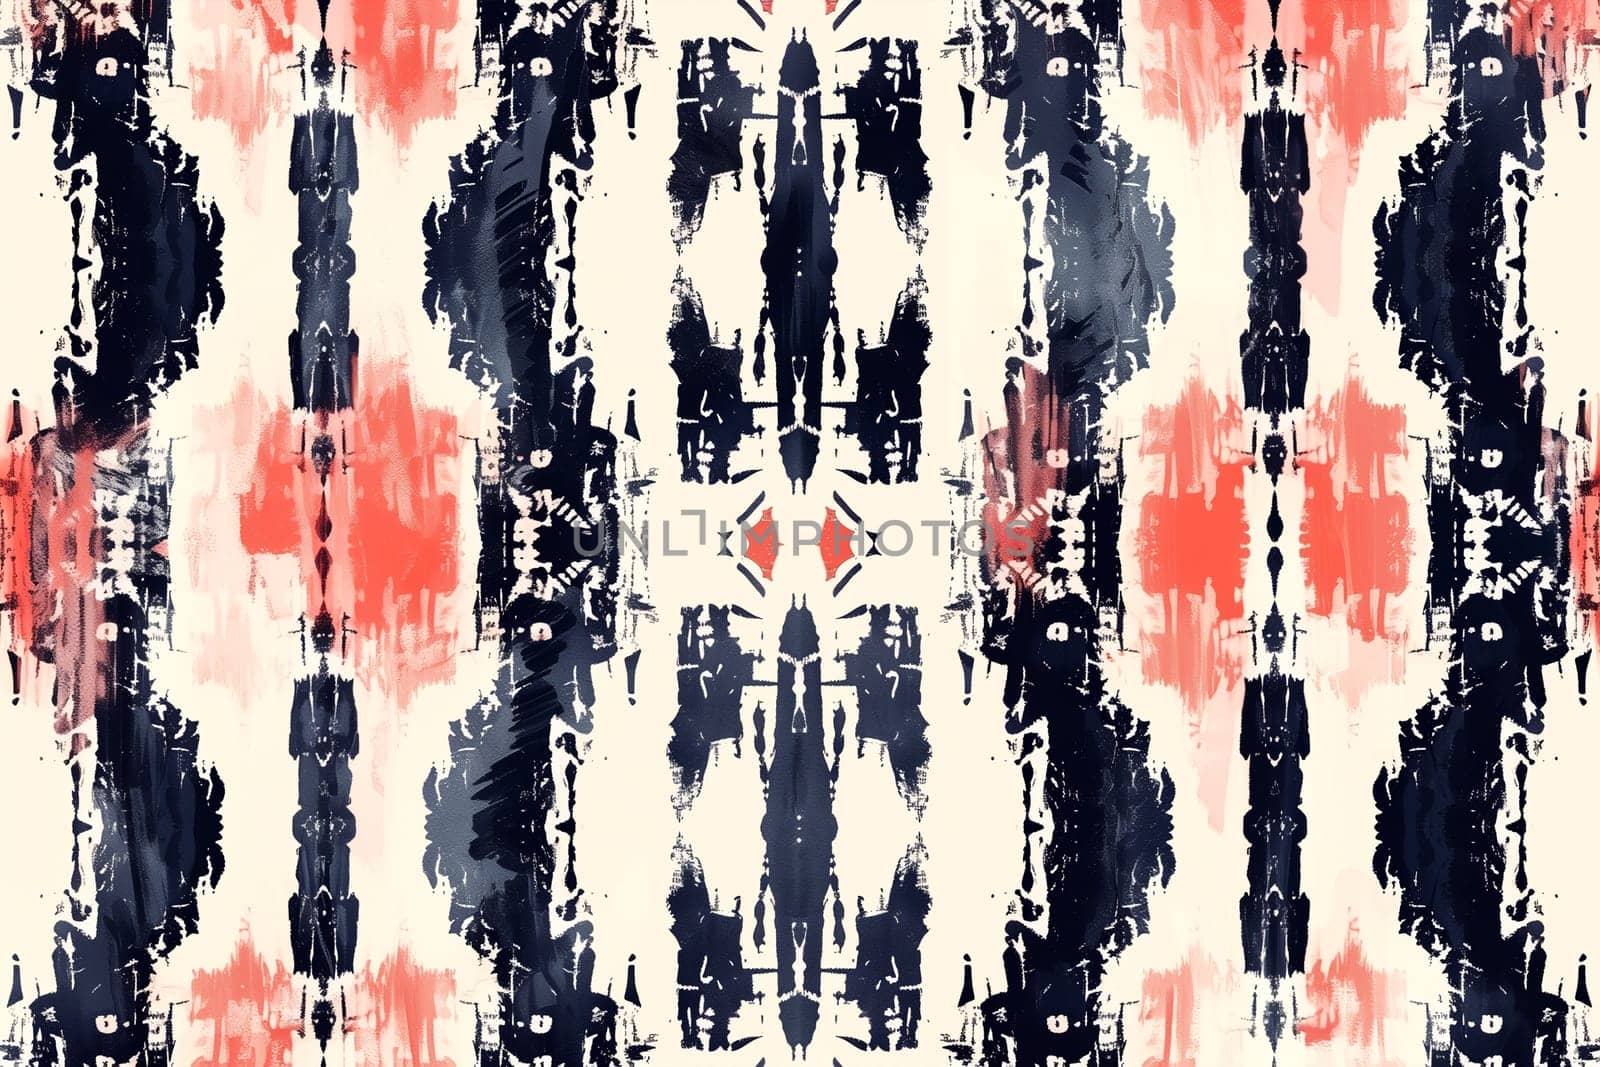 Black, White, and Red Abstract Pattern by Sd28DimoN_1976